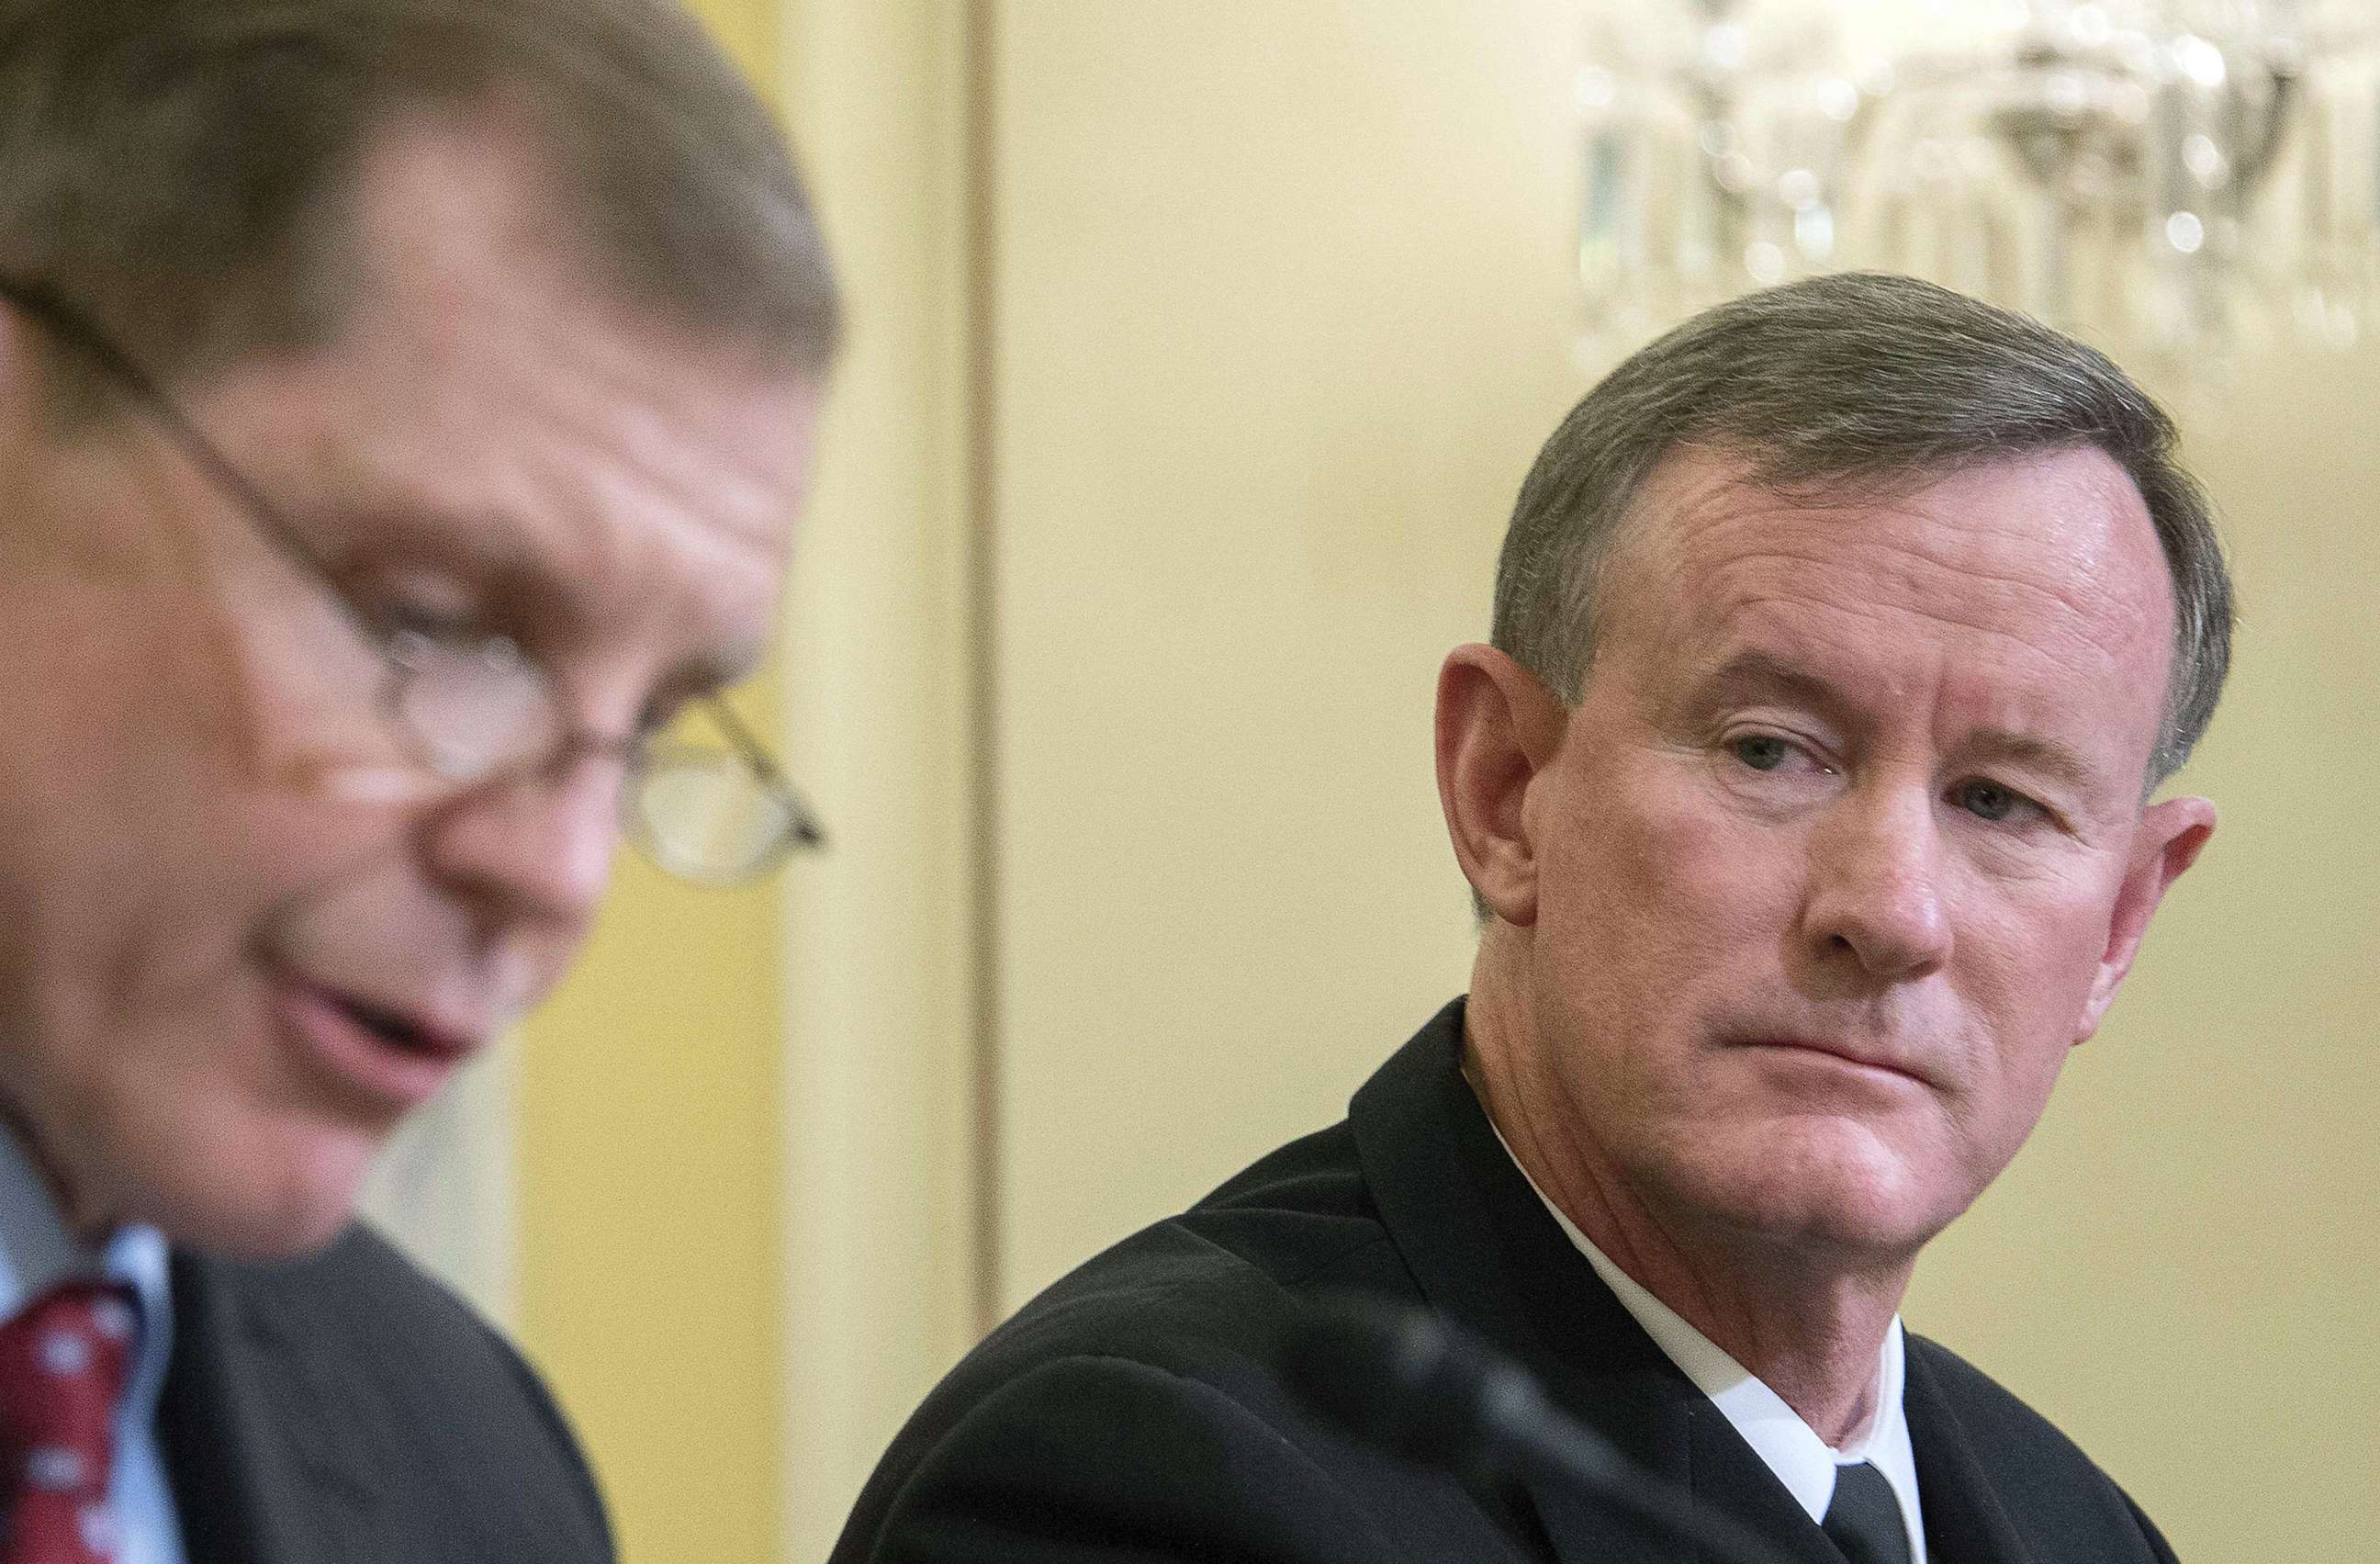 PHOTO: Commander of U.S. Special Operations Command, Admiral William H. McRaven, right, testifies before the Senate Armed Services subcommittee in Washington, D.C., March 11, 2014.